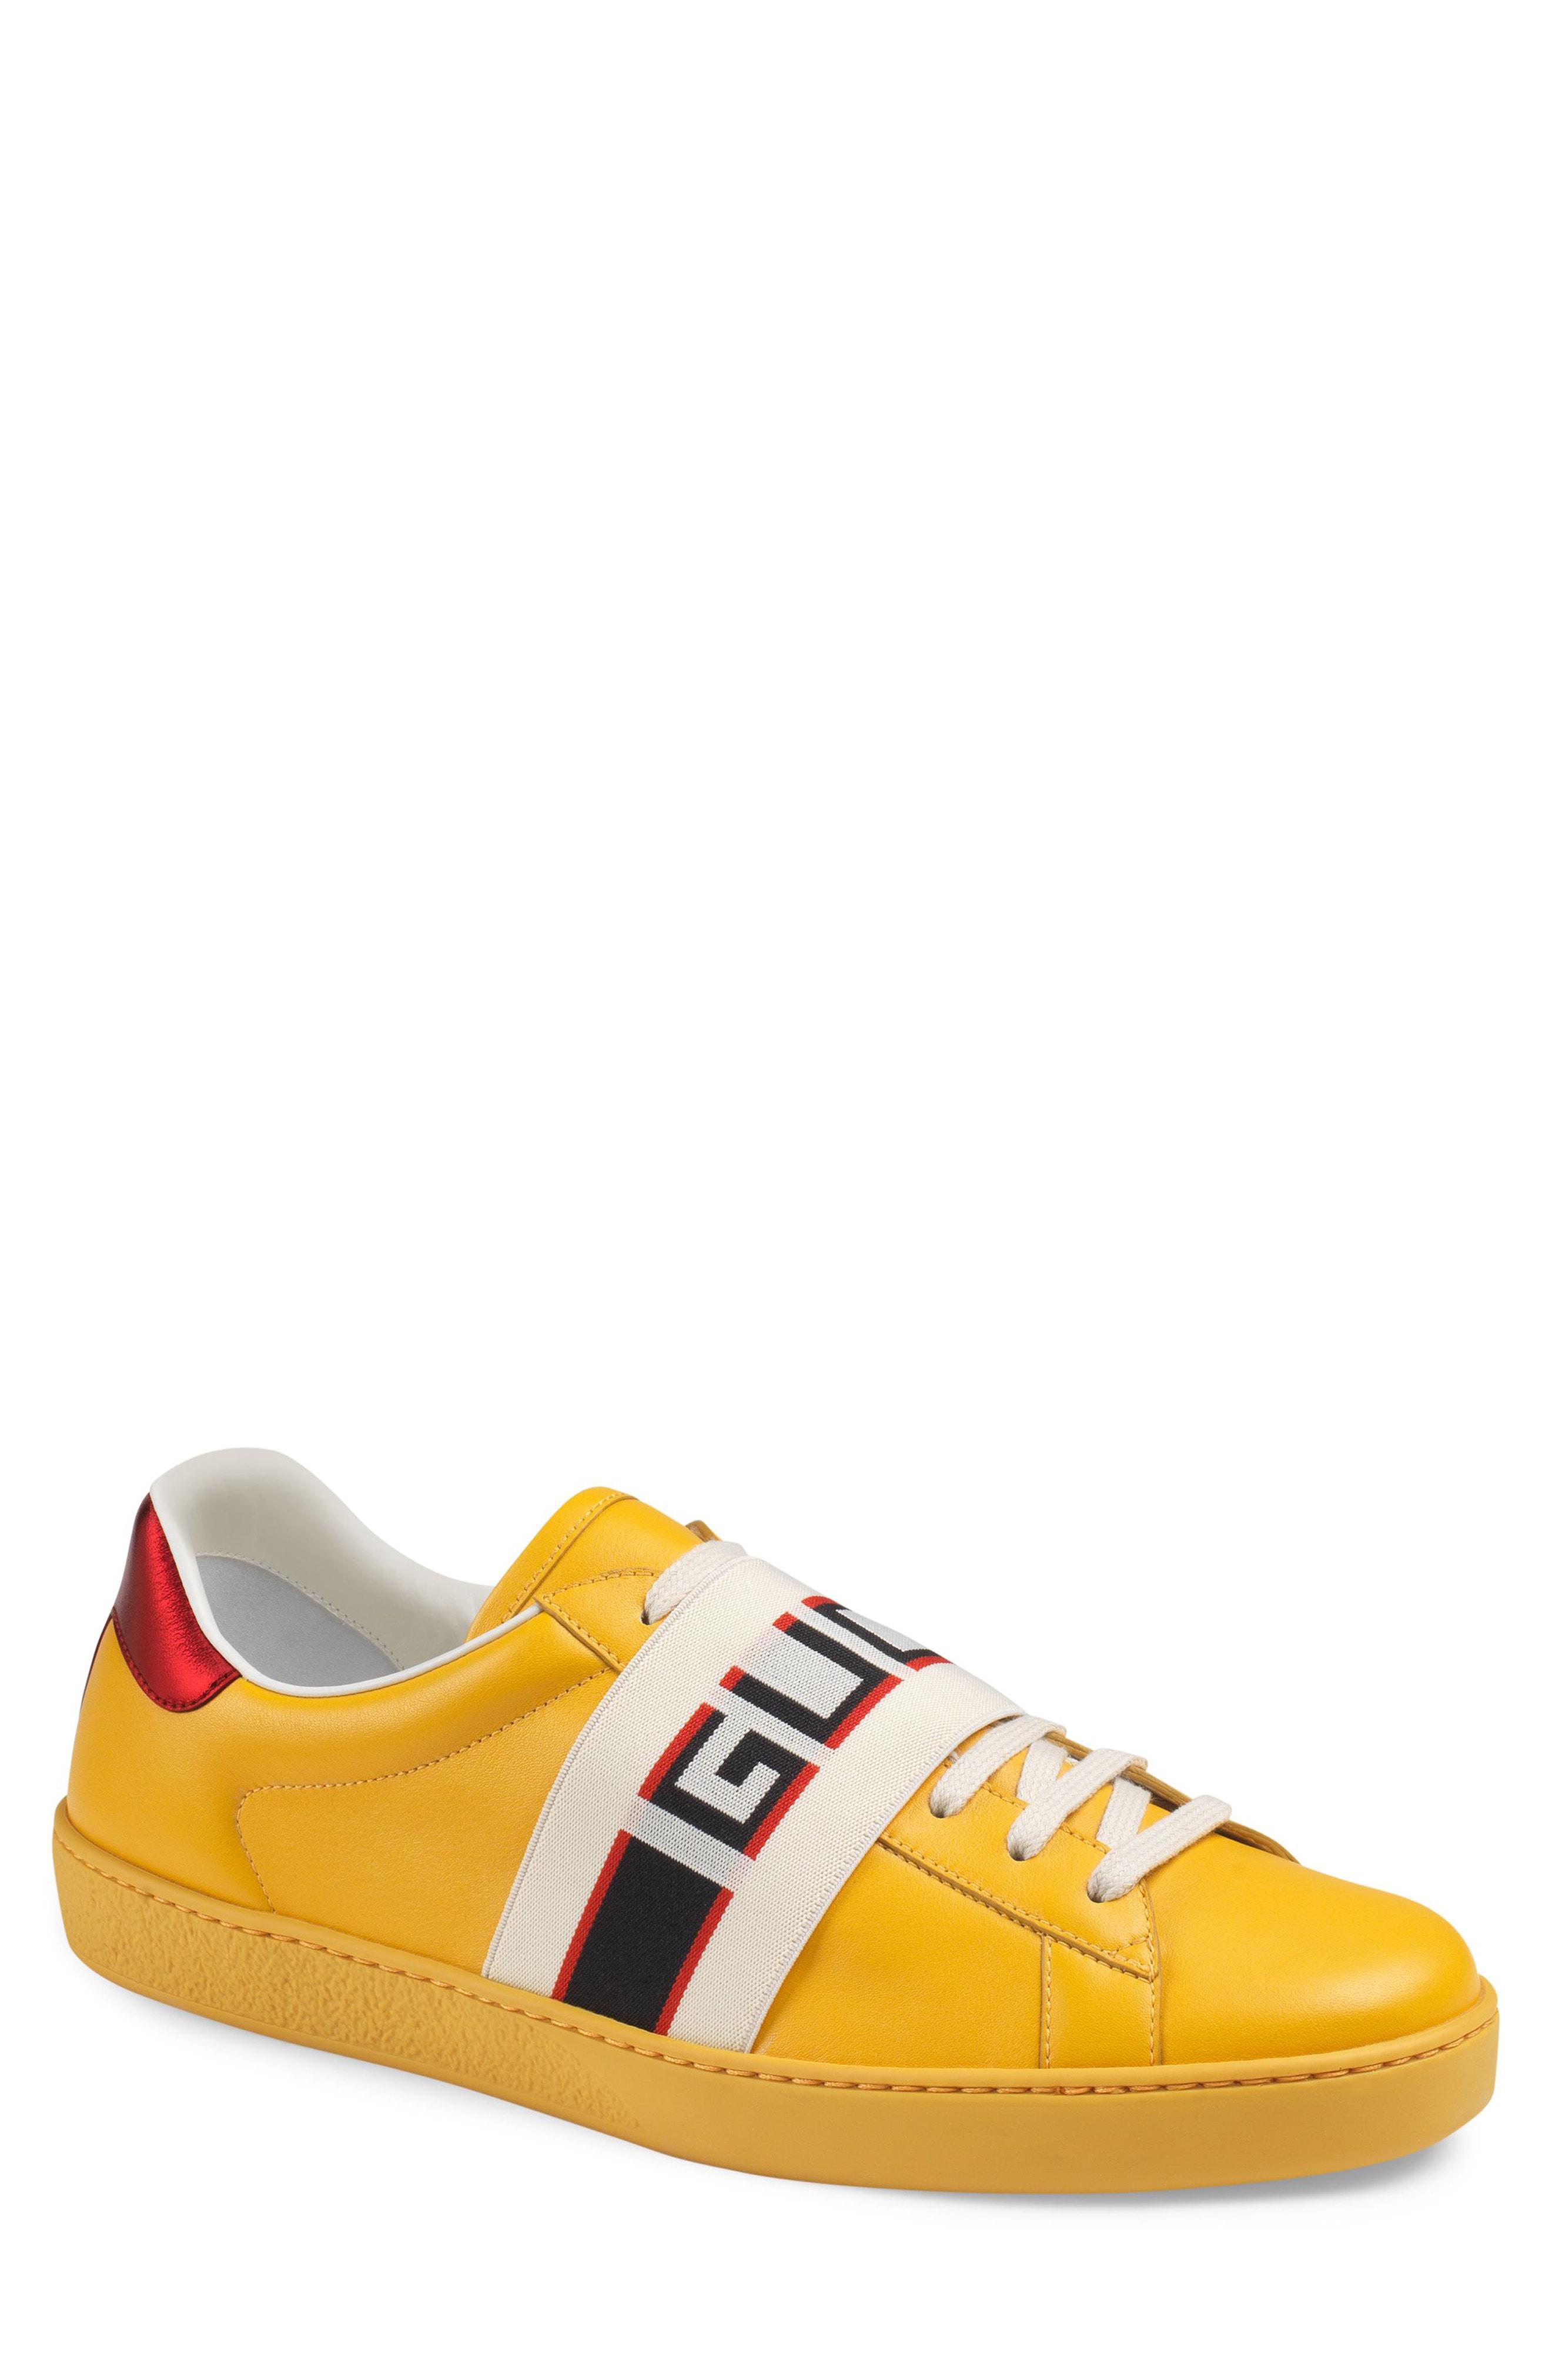 Gucci Leather Yellow New Ace Elastic 